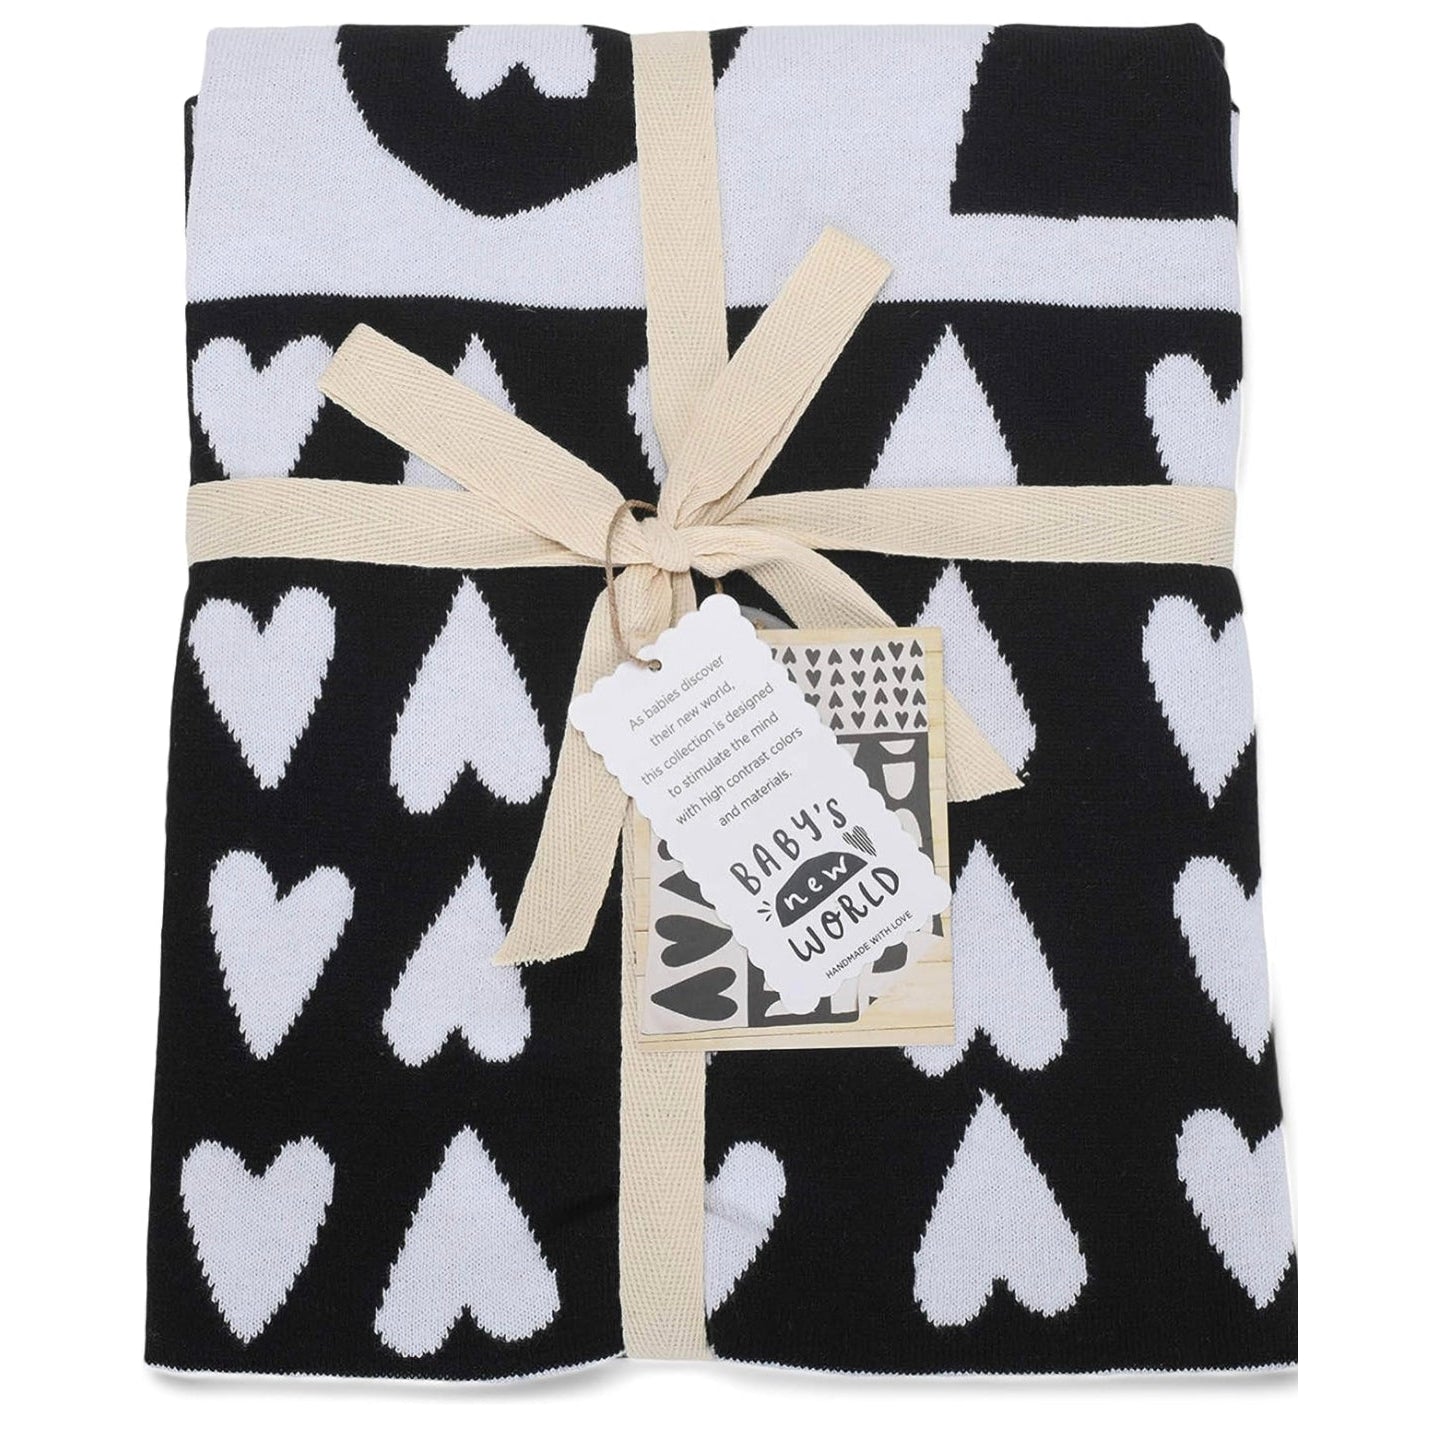 Black and White Woven Blanket